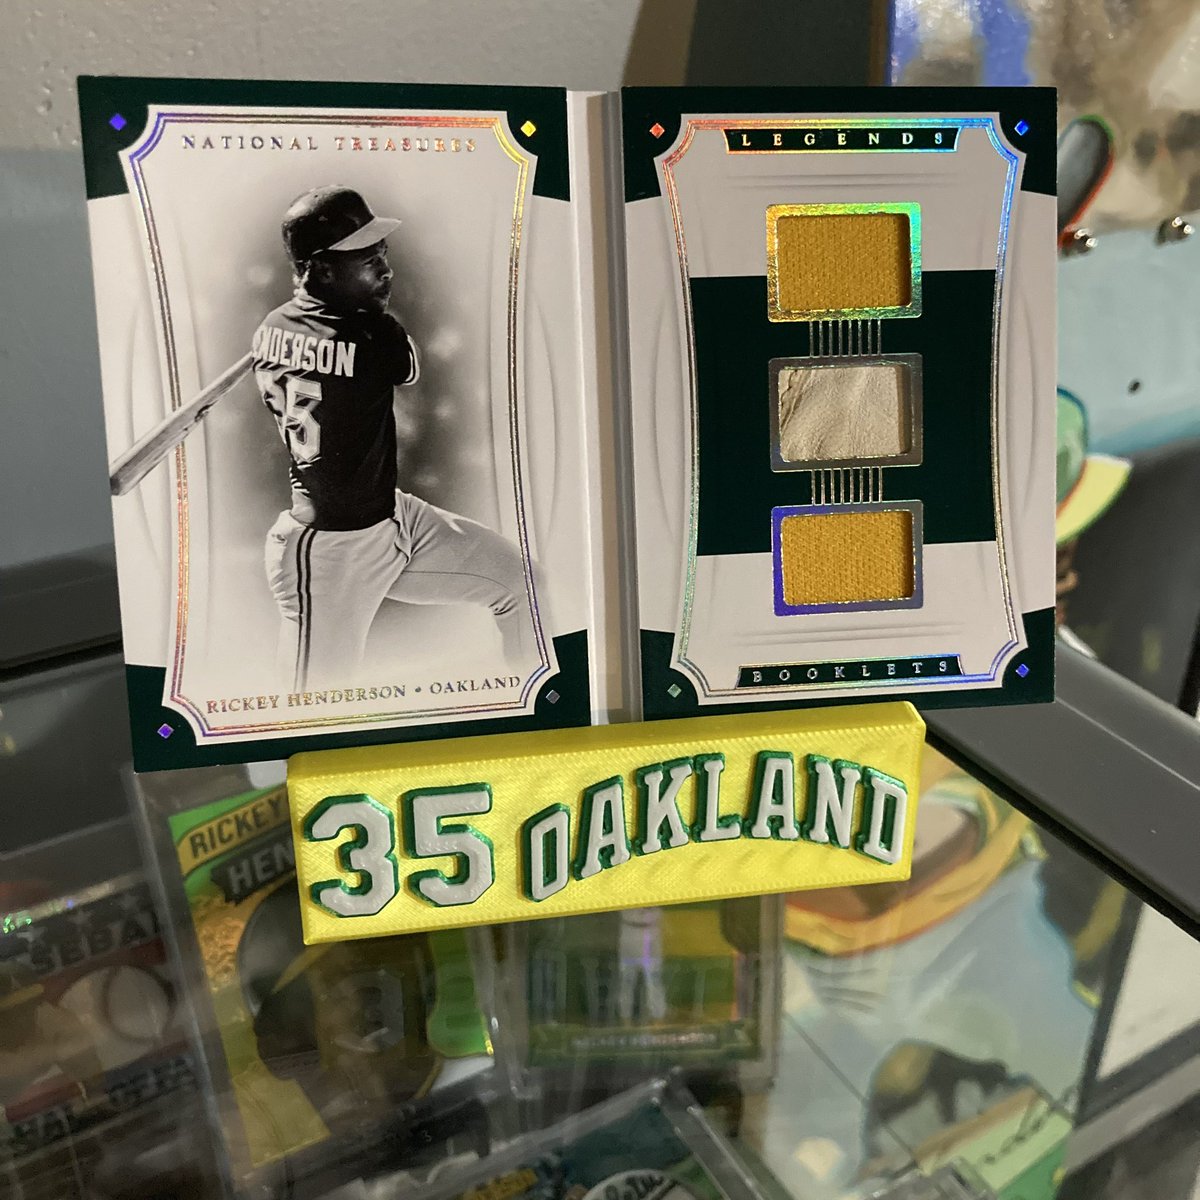 These are (4) Rickey Henderson items from my personal collection that I like….🔥💚👀🐐⚾️🏃🏿💨🧤#rickeyhenderson #thehobby